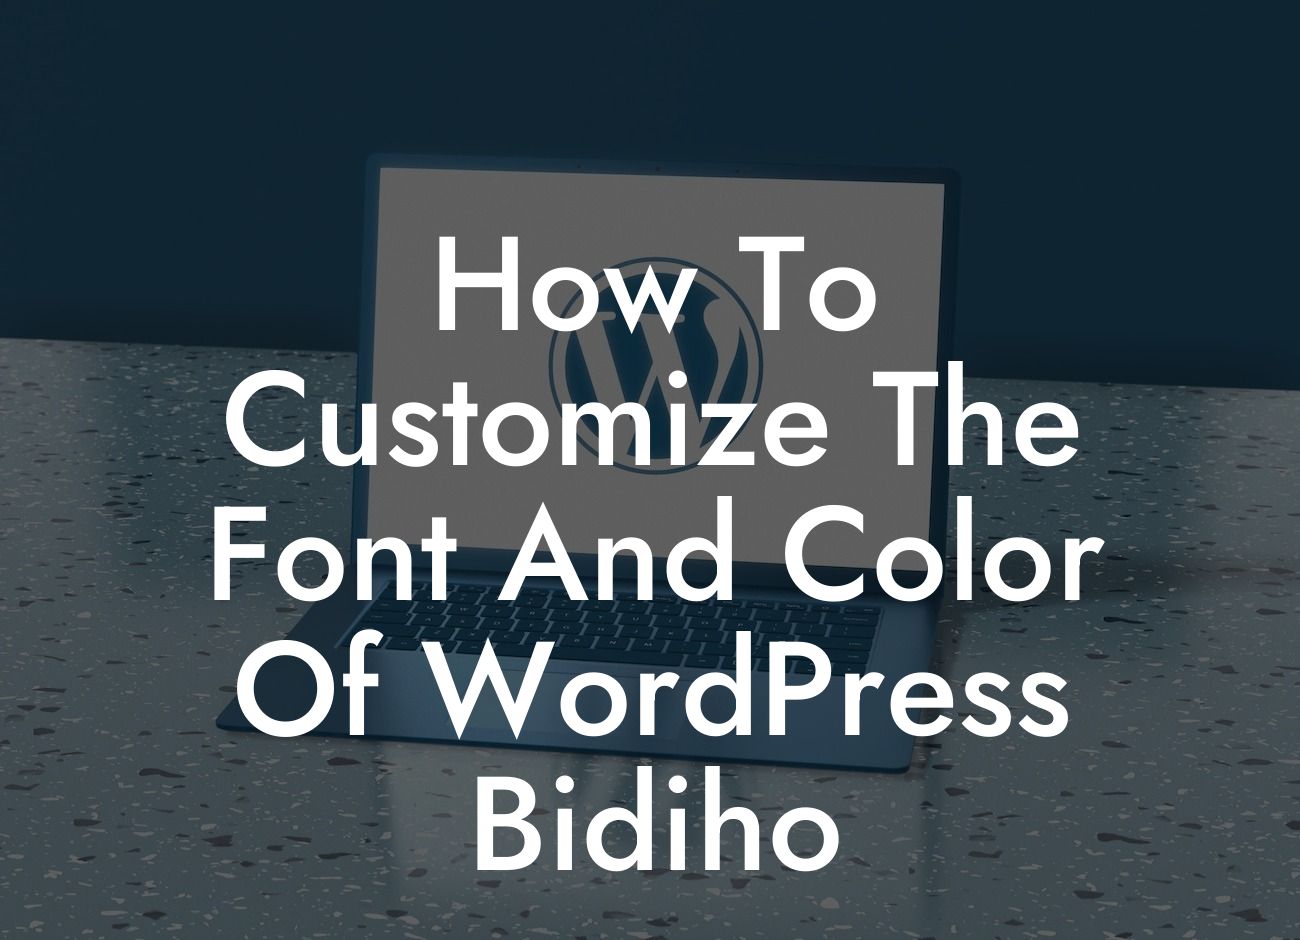 How To Customize The Font And Color Of WordPress Bidiho